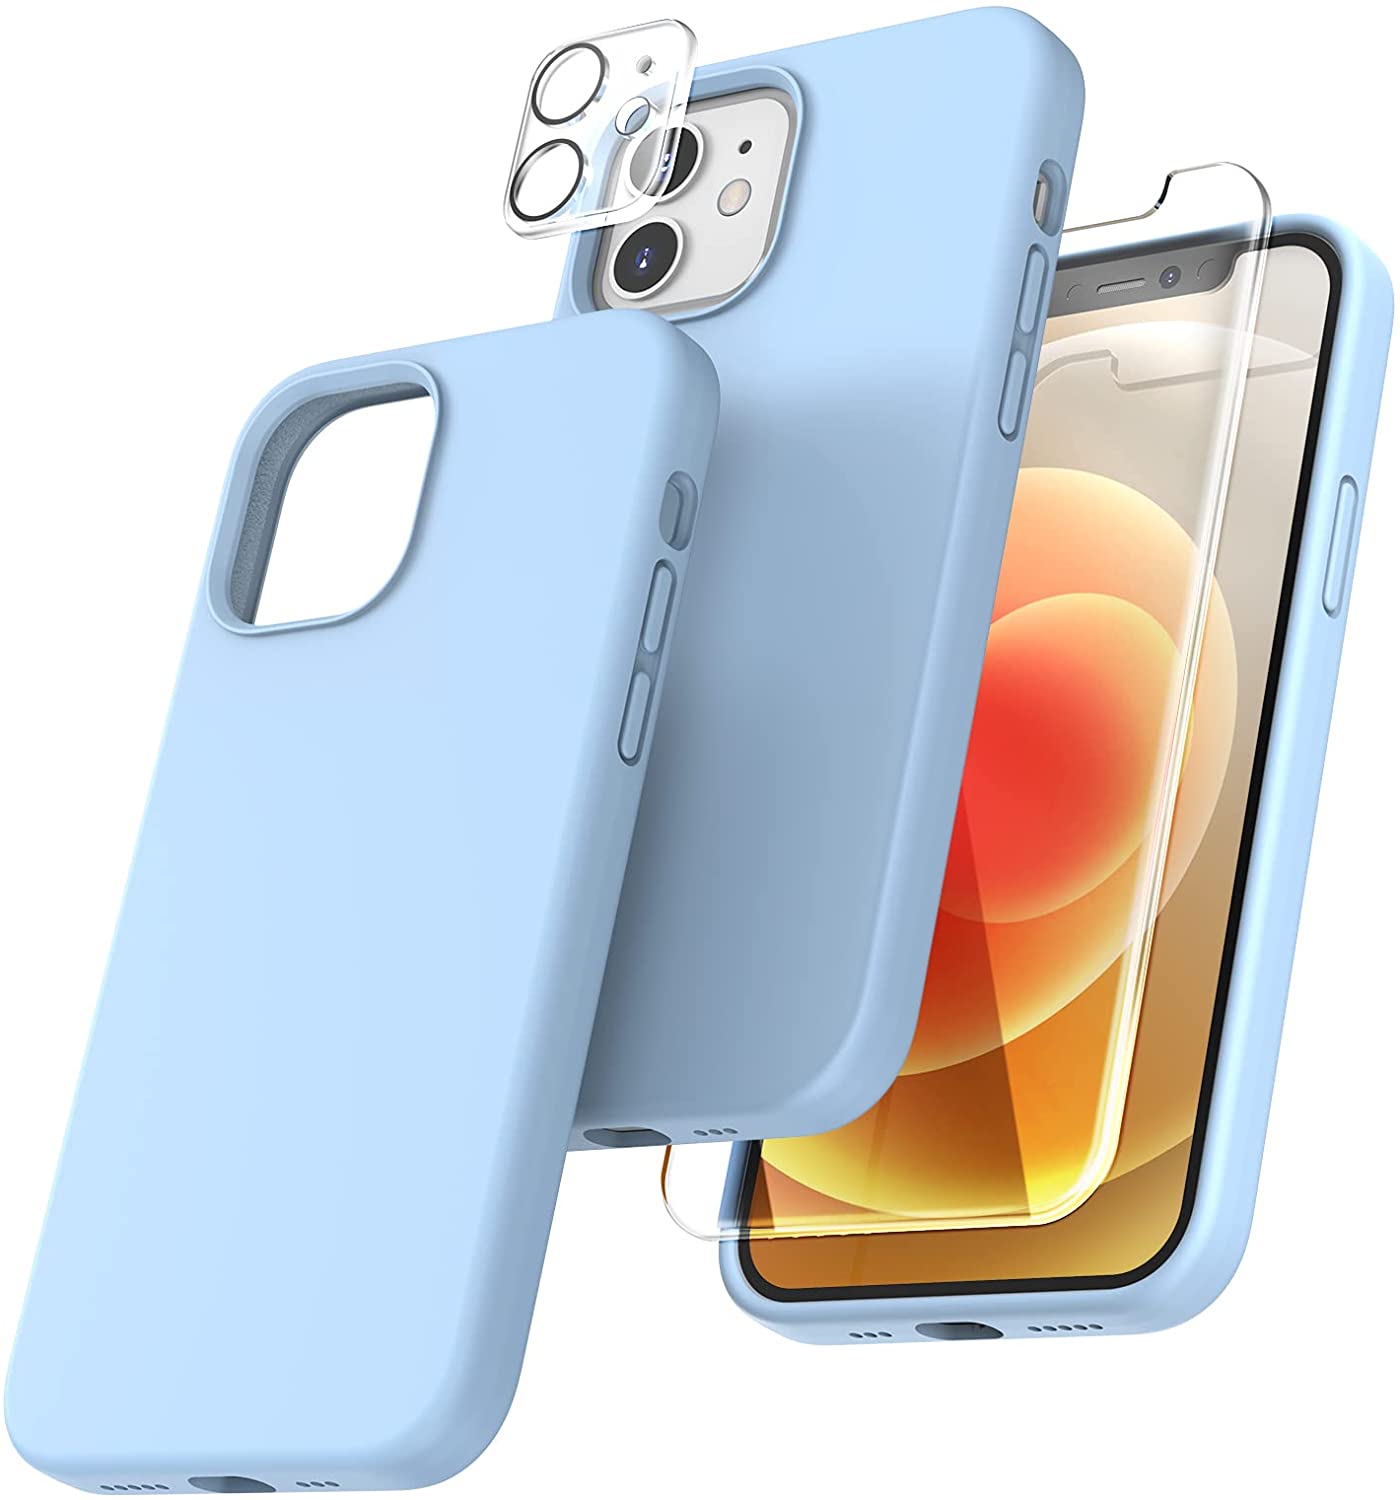 TOCOL [5 in 1] for iPhone 12 Case, for iPhone 12 Pro Case, with 2 Pack Screen Protector + 2 Pack Camera Lens Protector, Silicone Shockproof Phone Case [Anti-Scratch] [Drop Protection], Light Blue